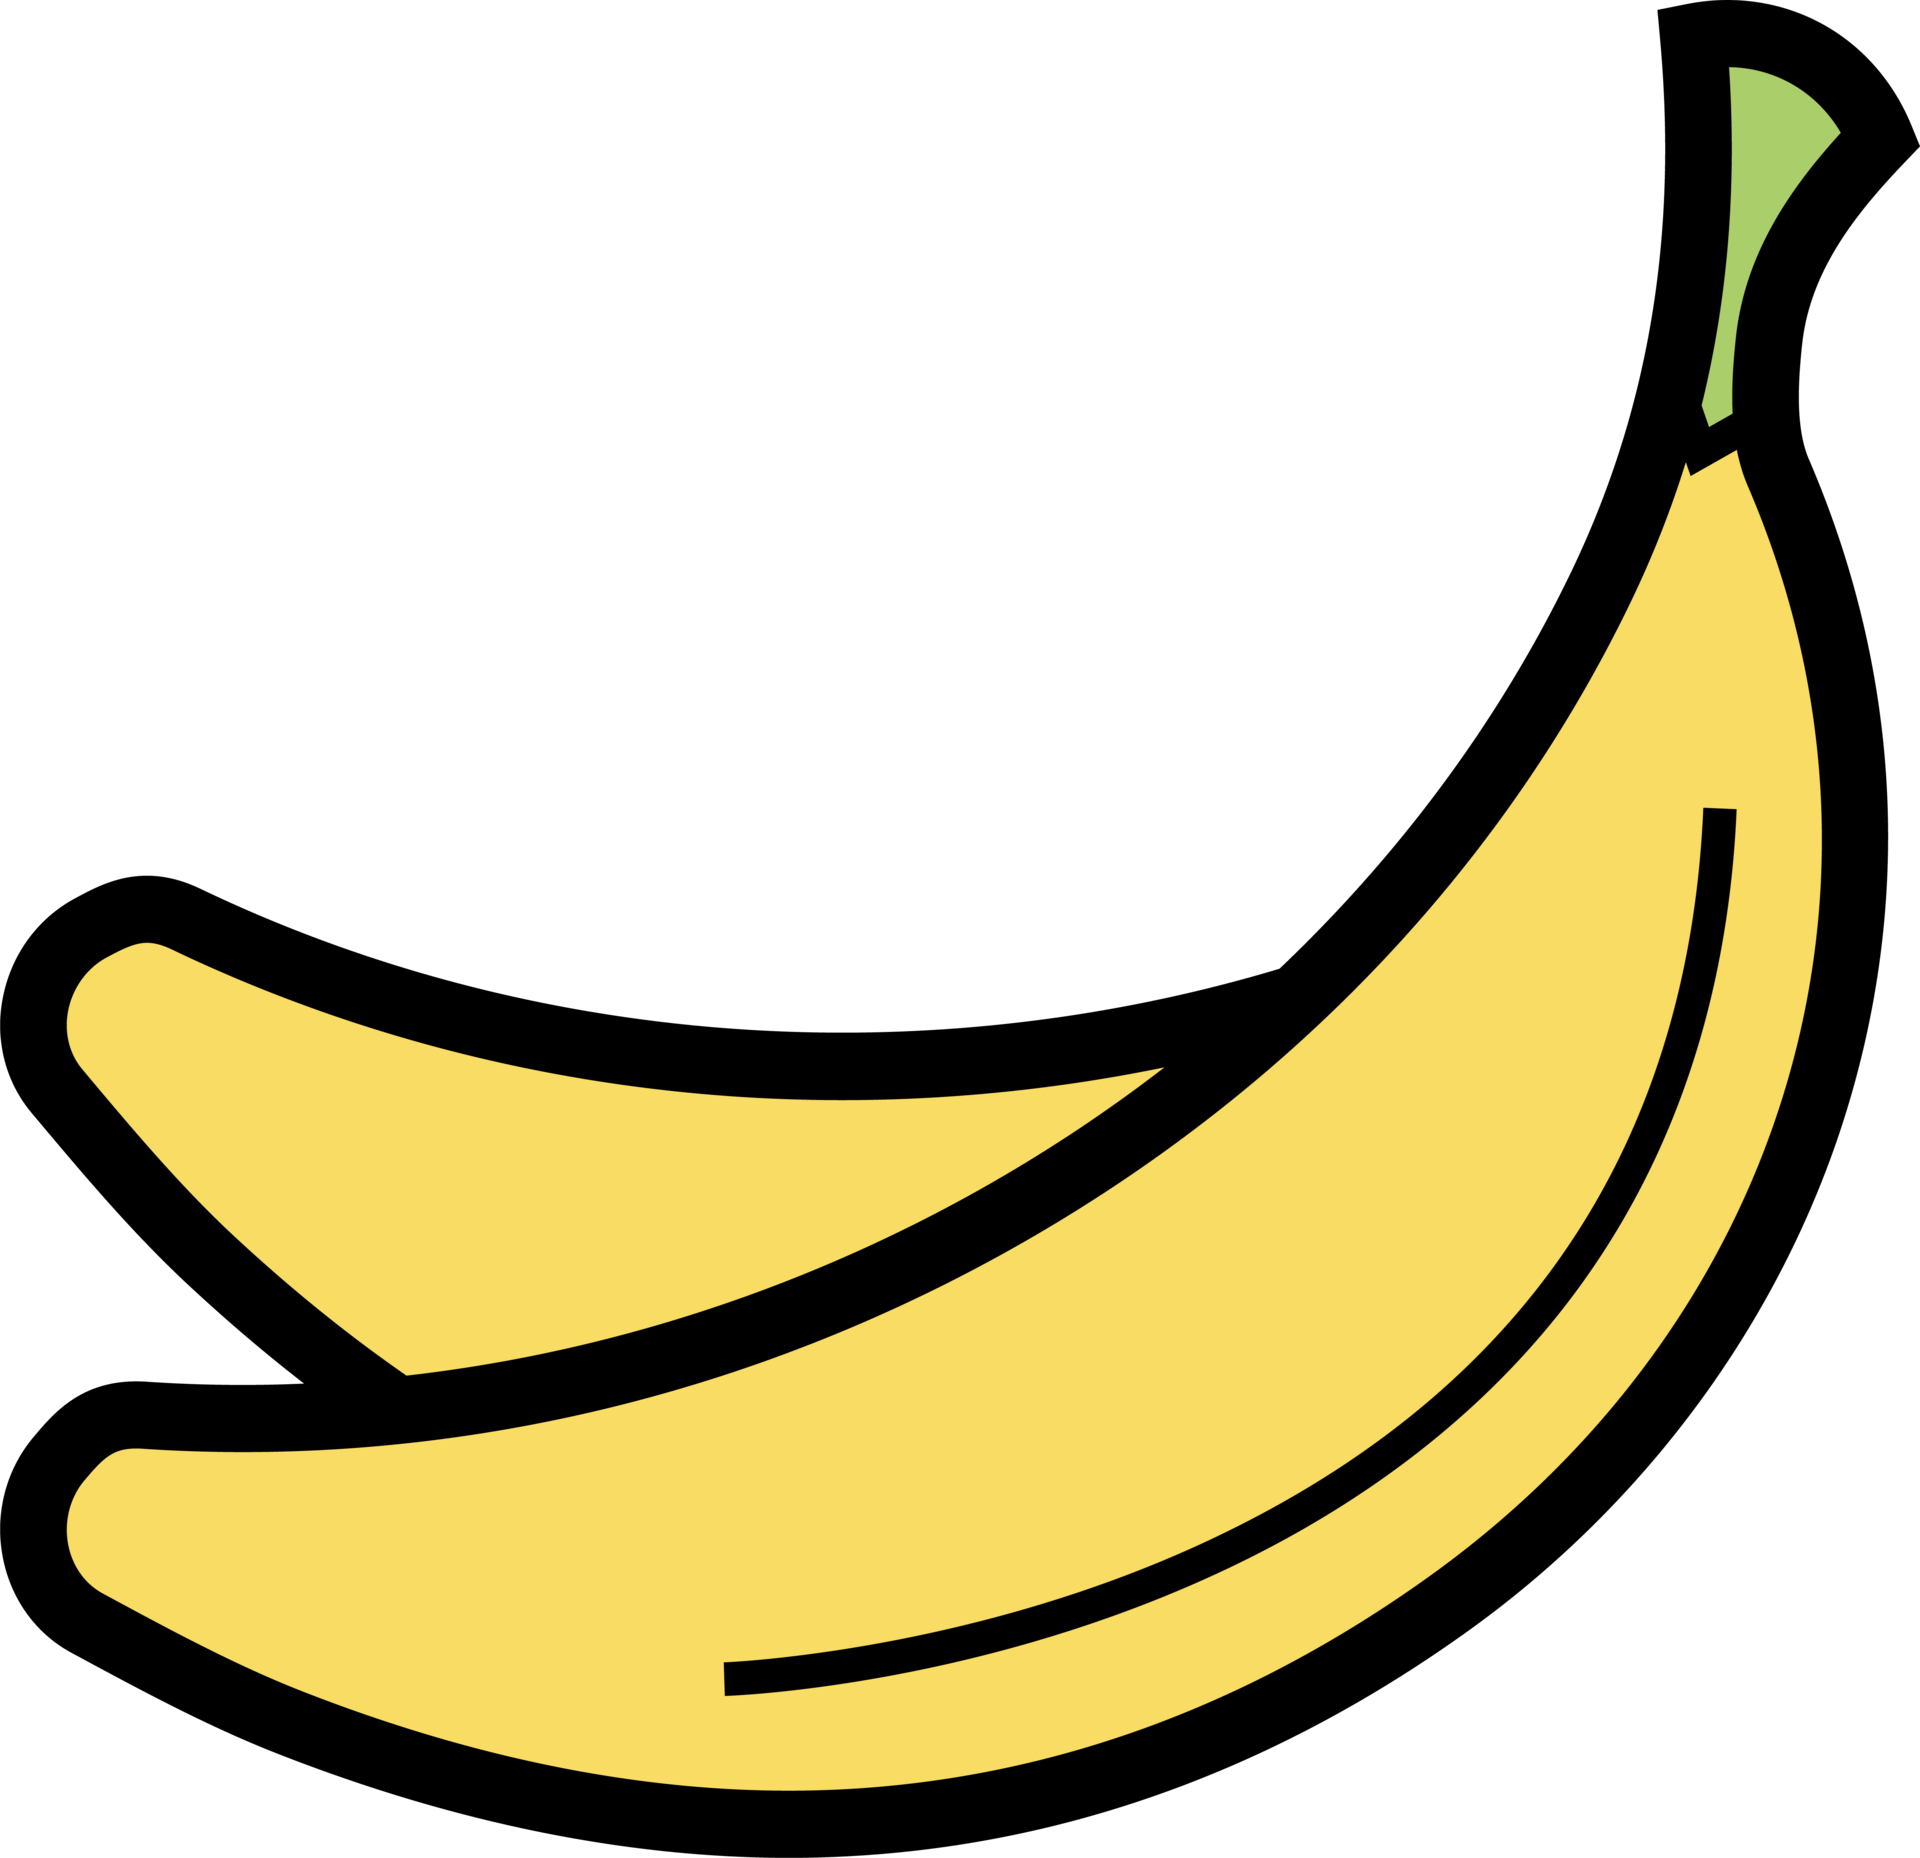 Banana Icon Download PNG Transparent Background, Free Download #27787 -  FreeIconsPNG